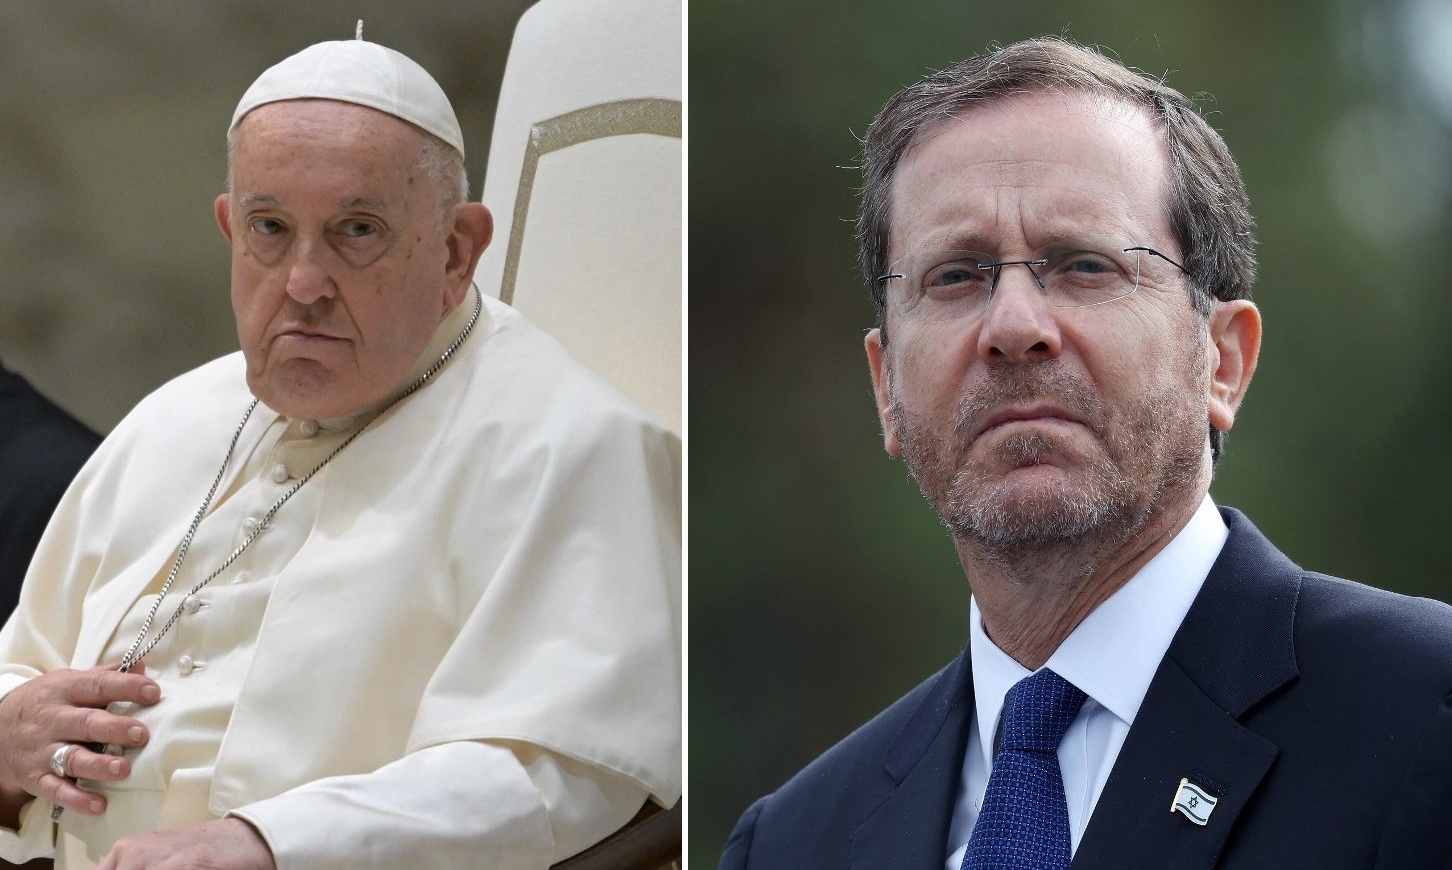 Pope told Herzog last month Israel cannot "respond to terror with terror", WP says